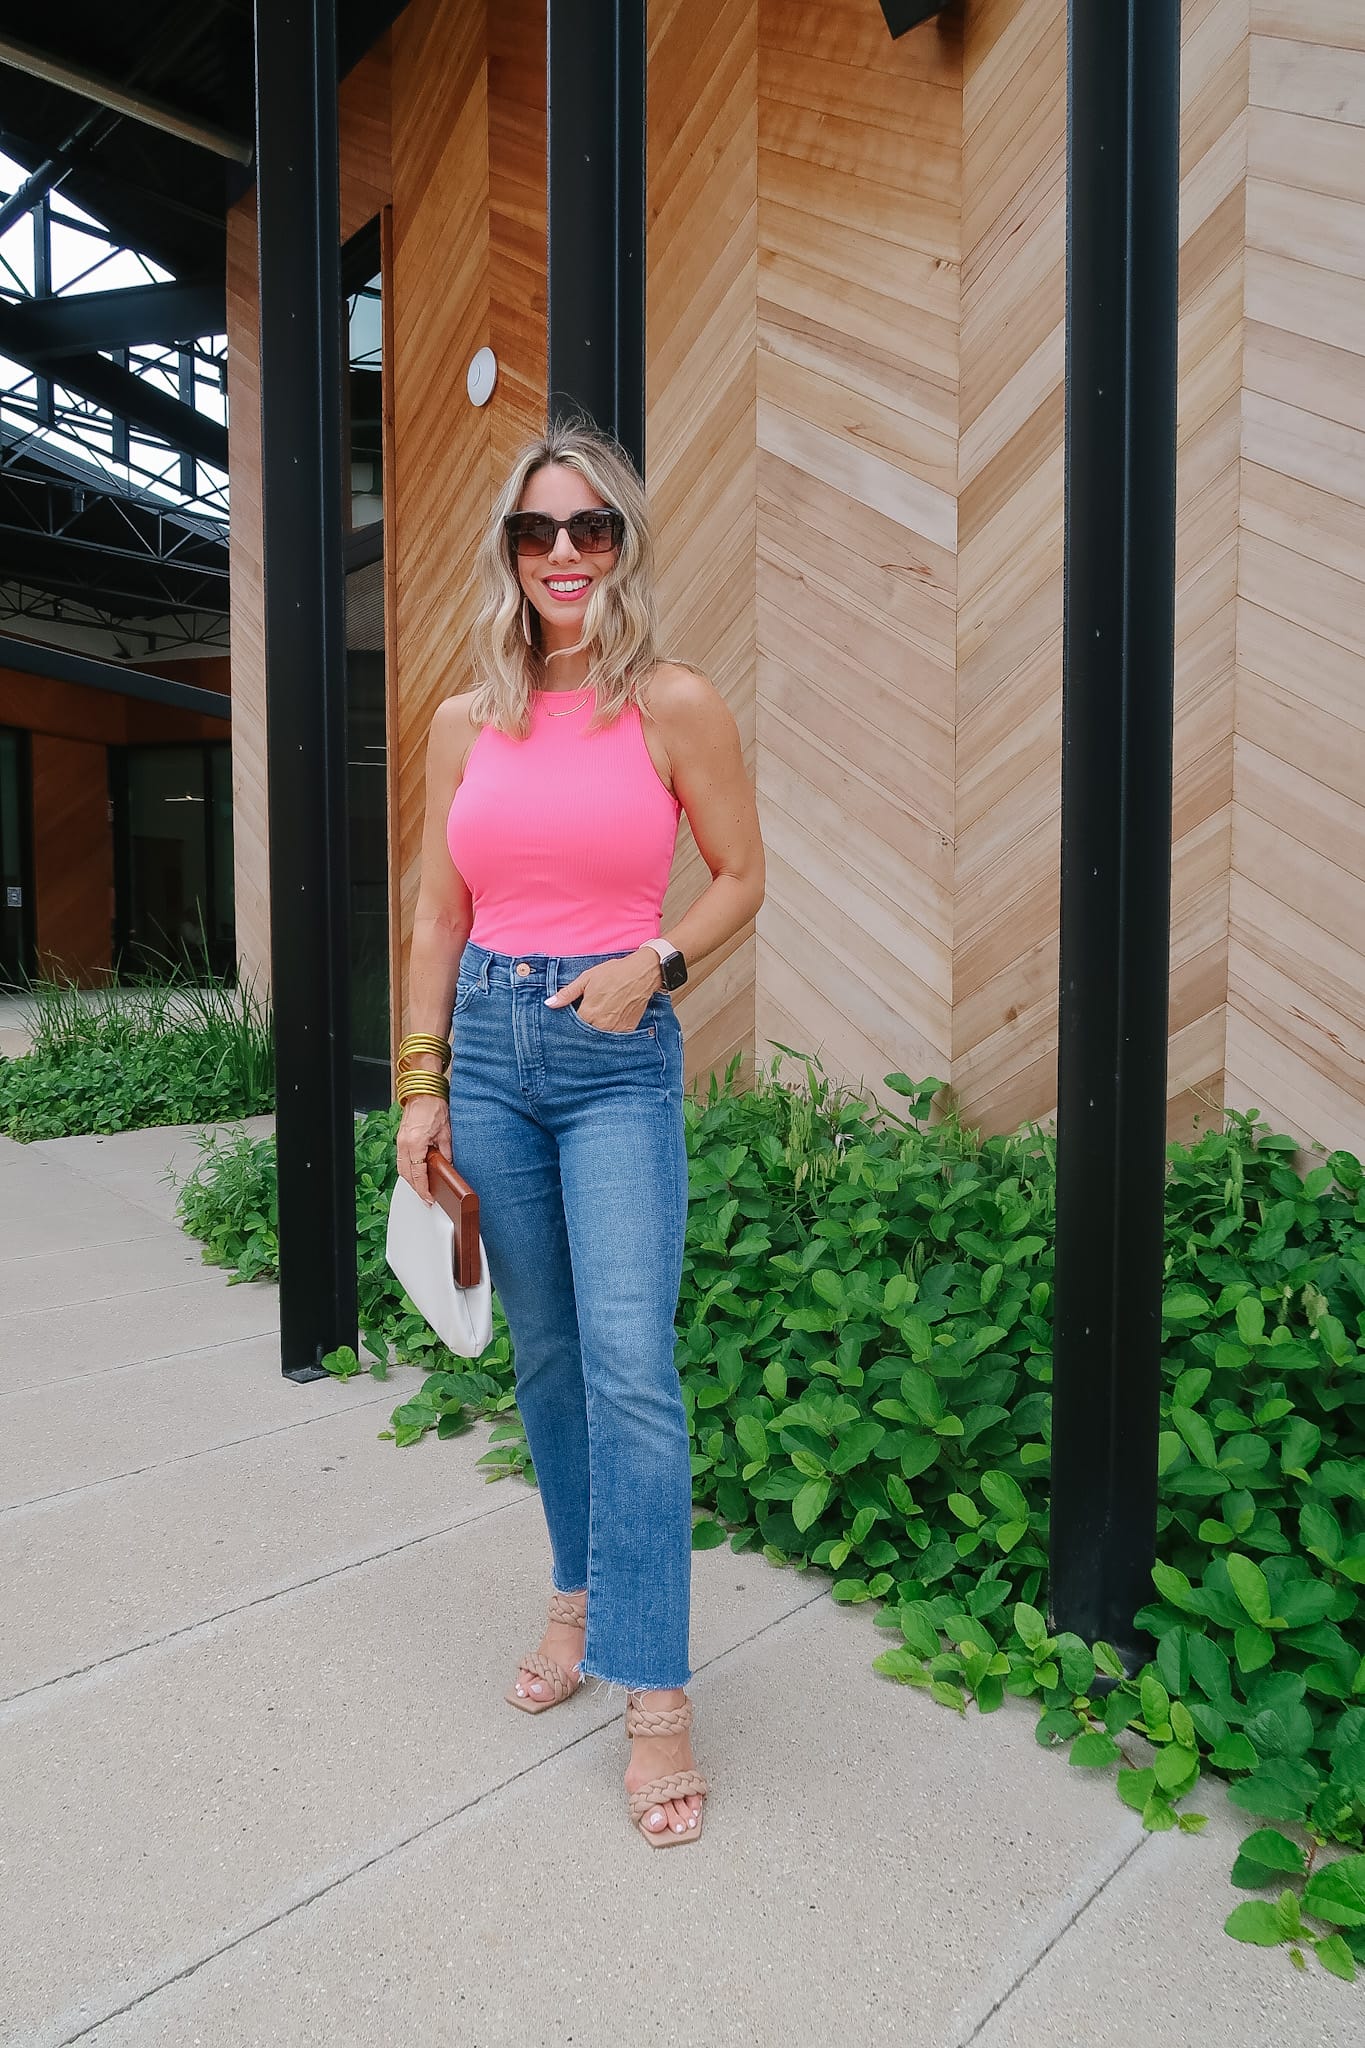 Outfits Lately, Bodysuit, Jeans, Sandals, Clutch 